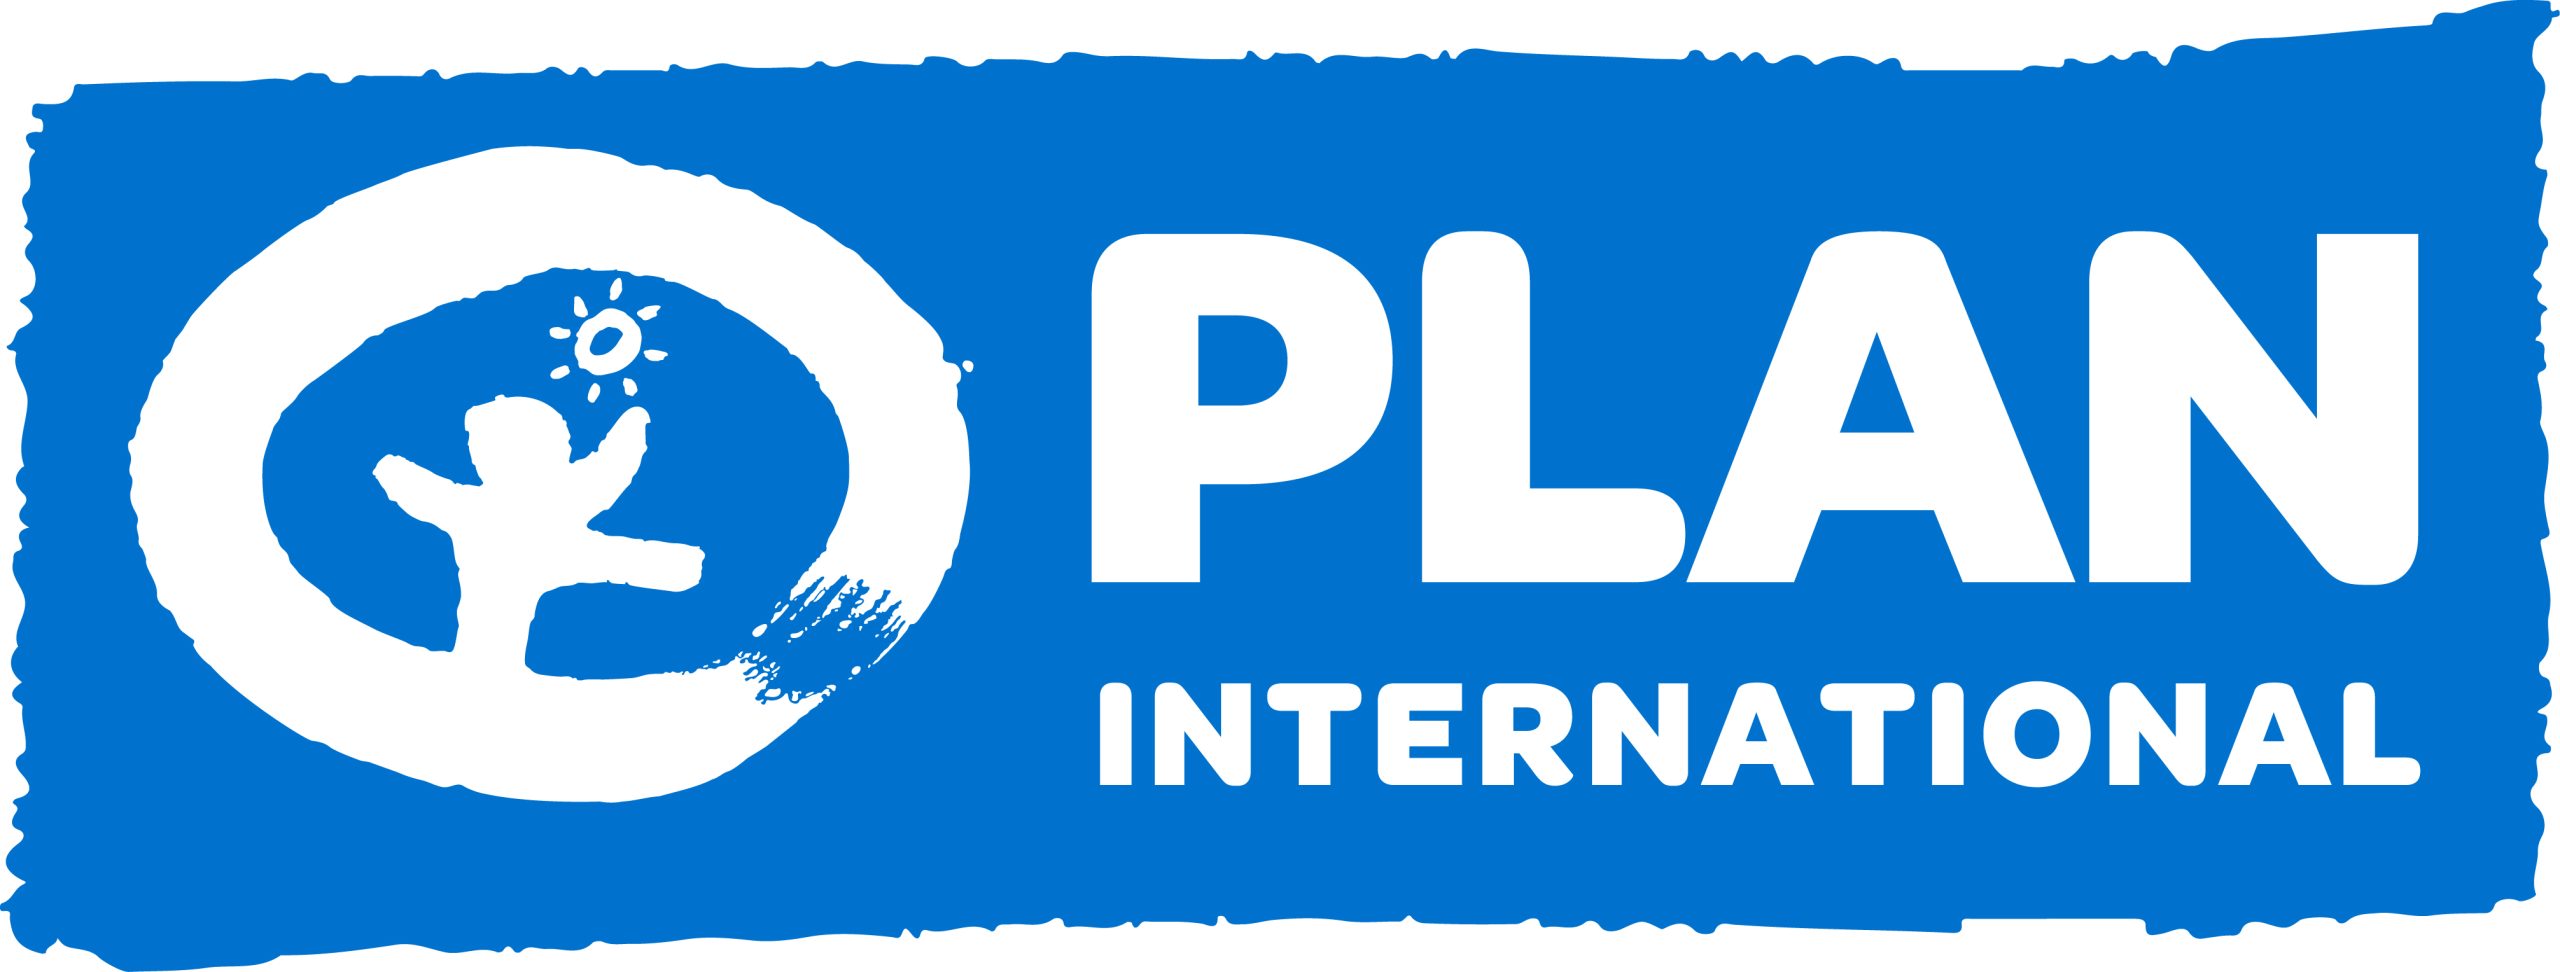 The Plan International logo is common to all our communications. It represents us and, as such, must be reproduced consistently. The Plan International logo is made up of three components  the symbol, logo and highlight. The Plan International logo is intended as a shorthand, defining the organisation we are. The simplistic illustration of the dancing child implies that children are the starting point and focus of our activities. The graphic sun represents the optimism of childhood while the outer circle represents protection within a safe environment.The blue version of the Plan International logo should be used for most purposes including publications, advertising and stationery.